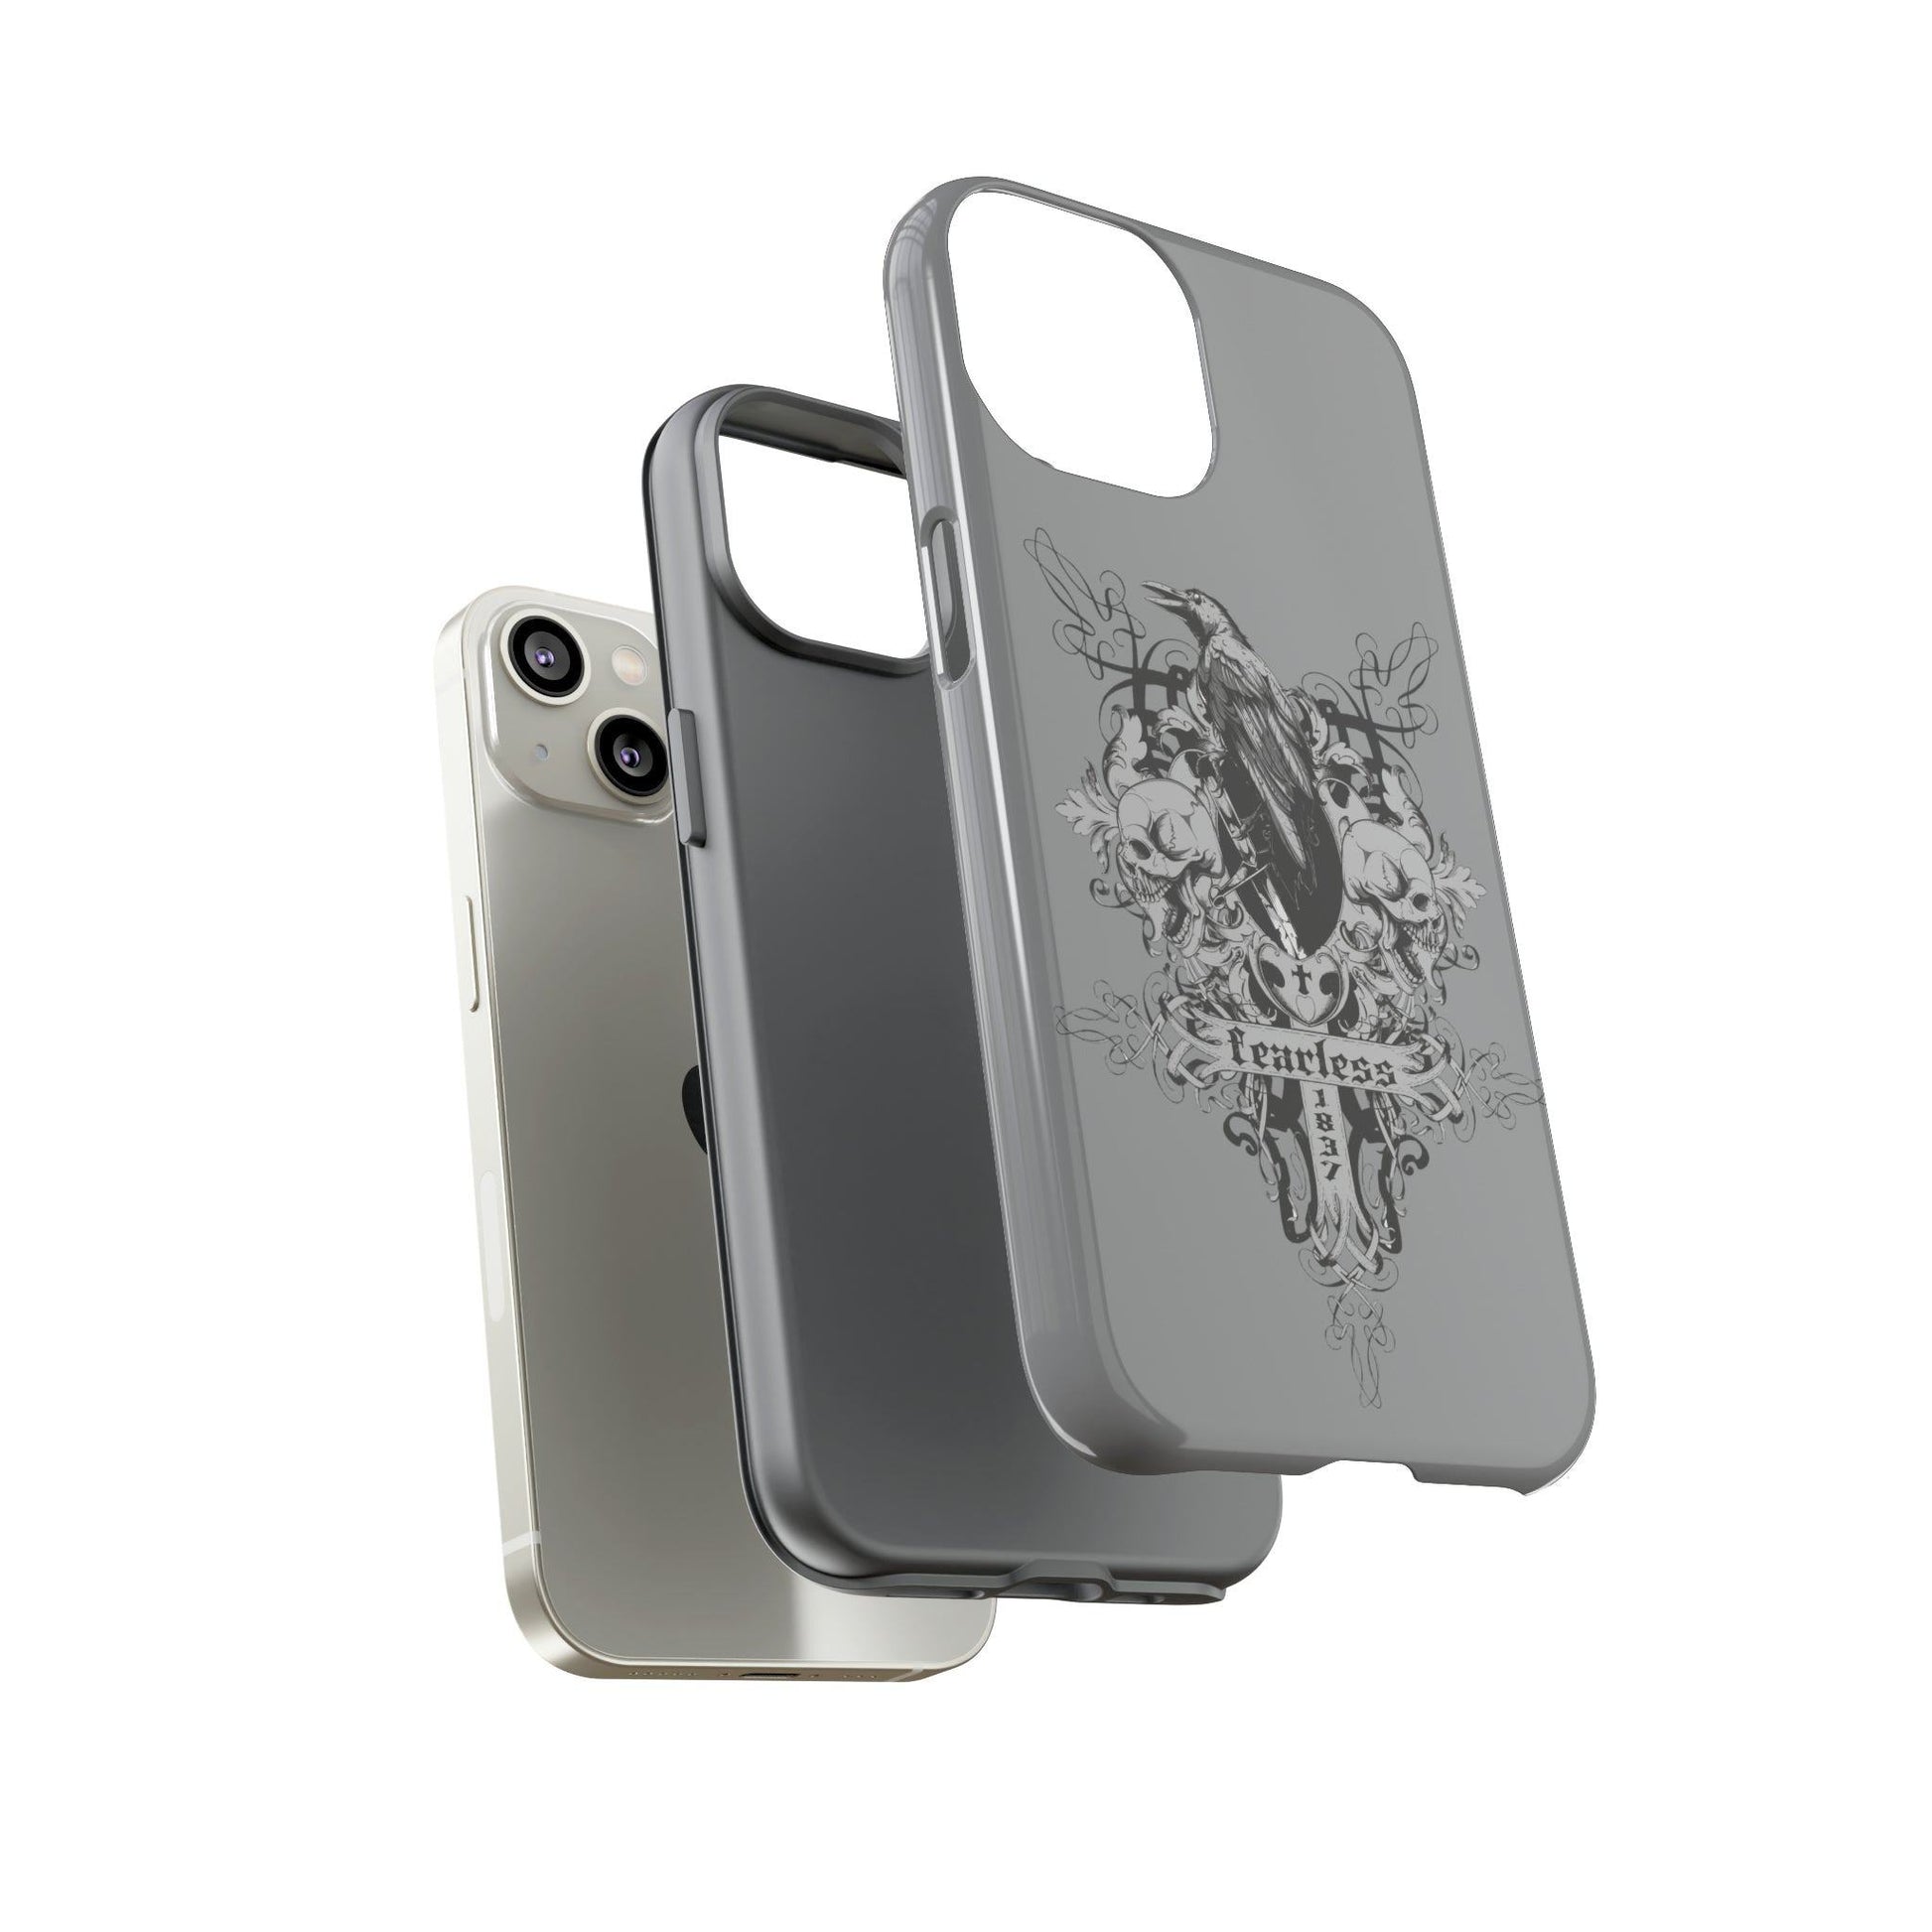 Apple Iphone Fearless Cover -- Apple Iphone Fearless Cover - undefined Phone Case | JLR Design